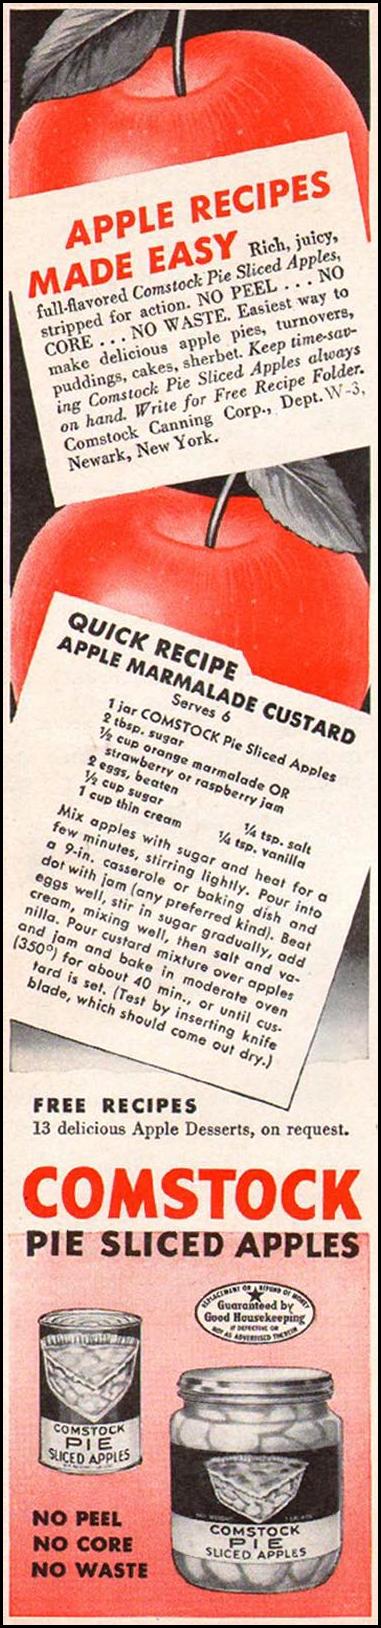 COMSTOCK PIE SLICED APPLES
WOMAN'S DAY
01/01/1947
p. 8